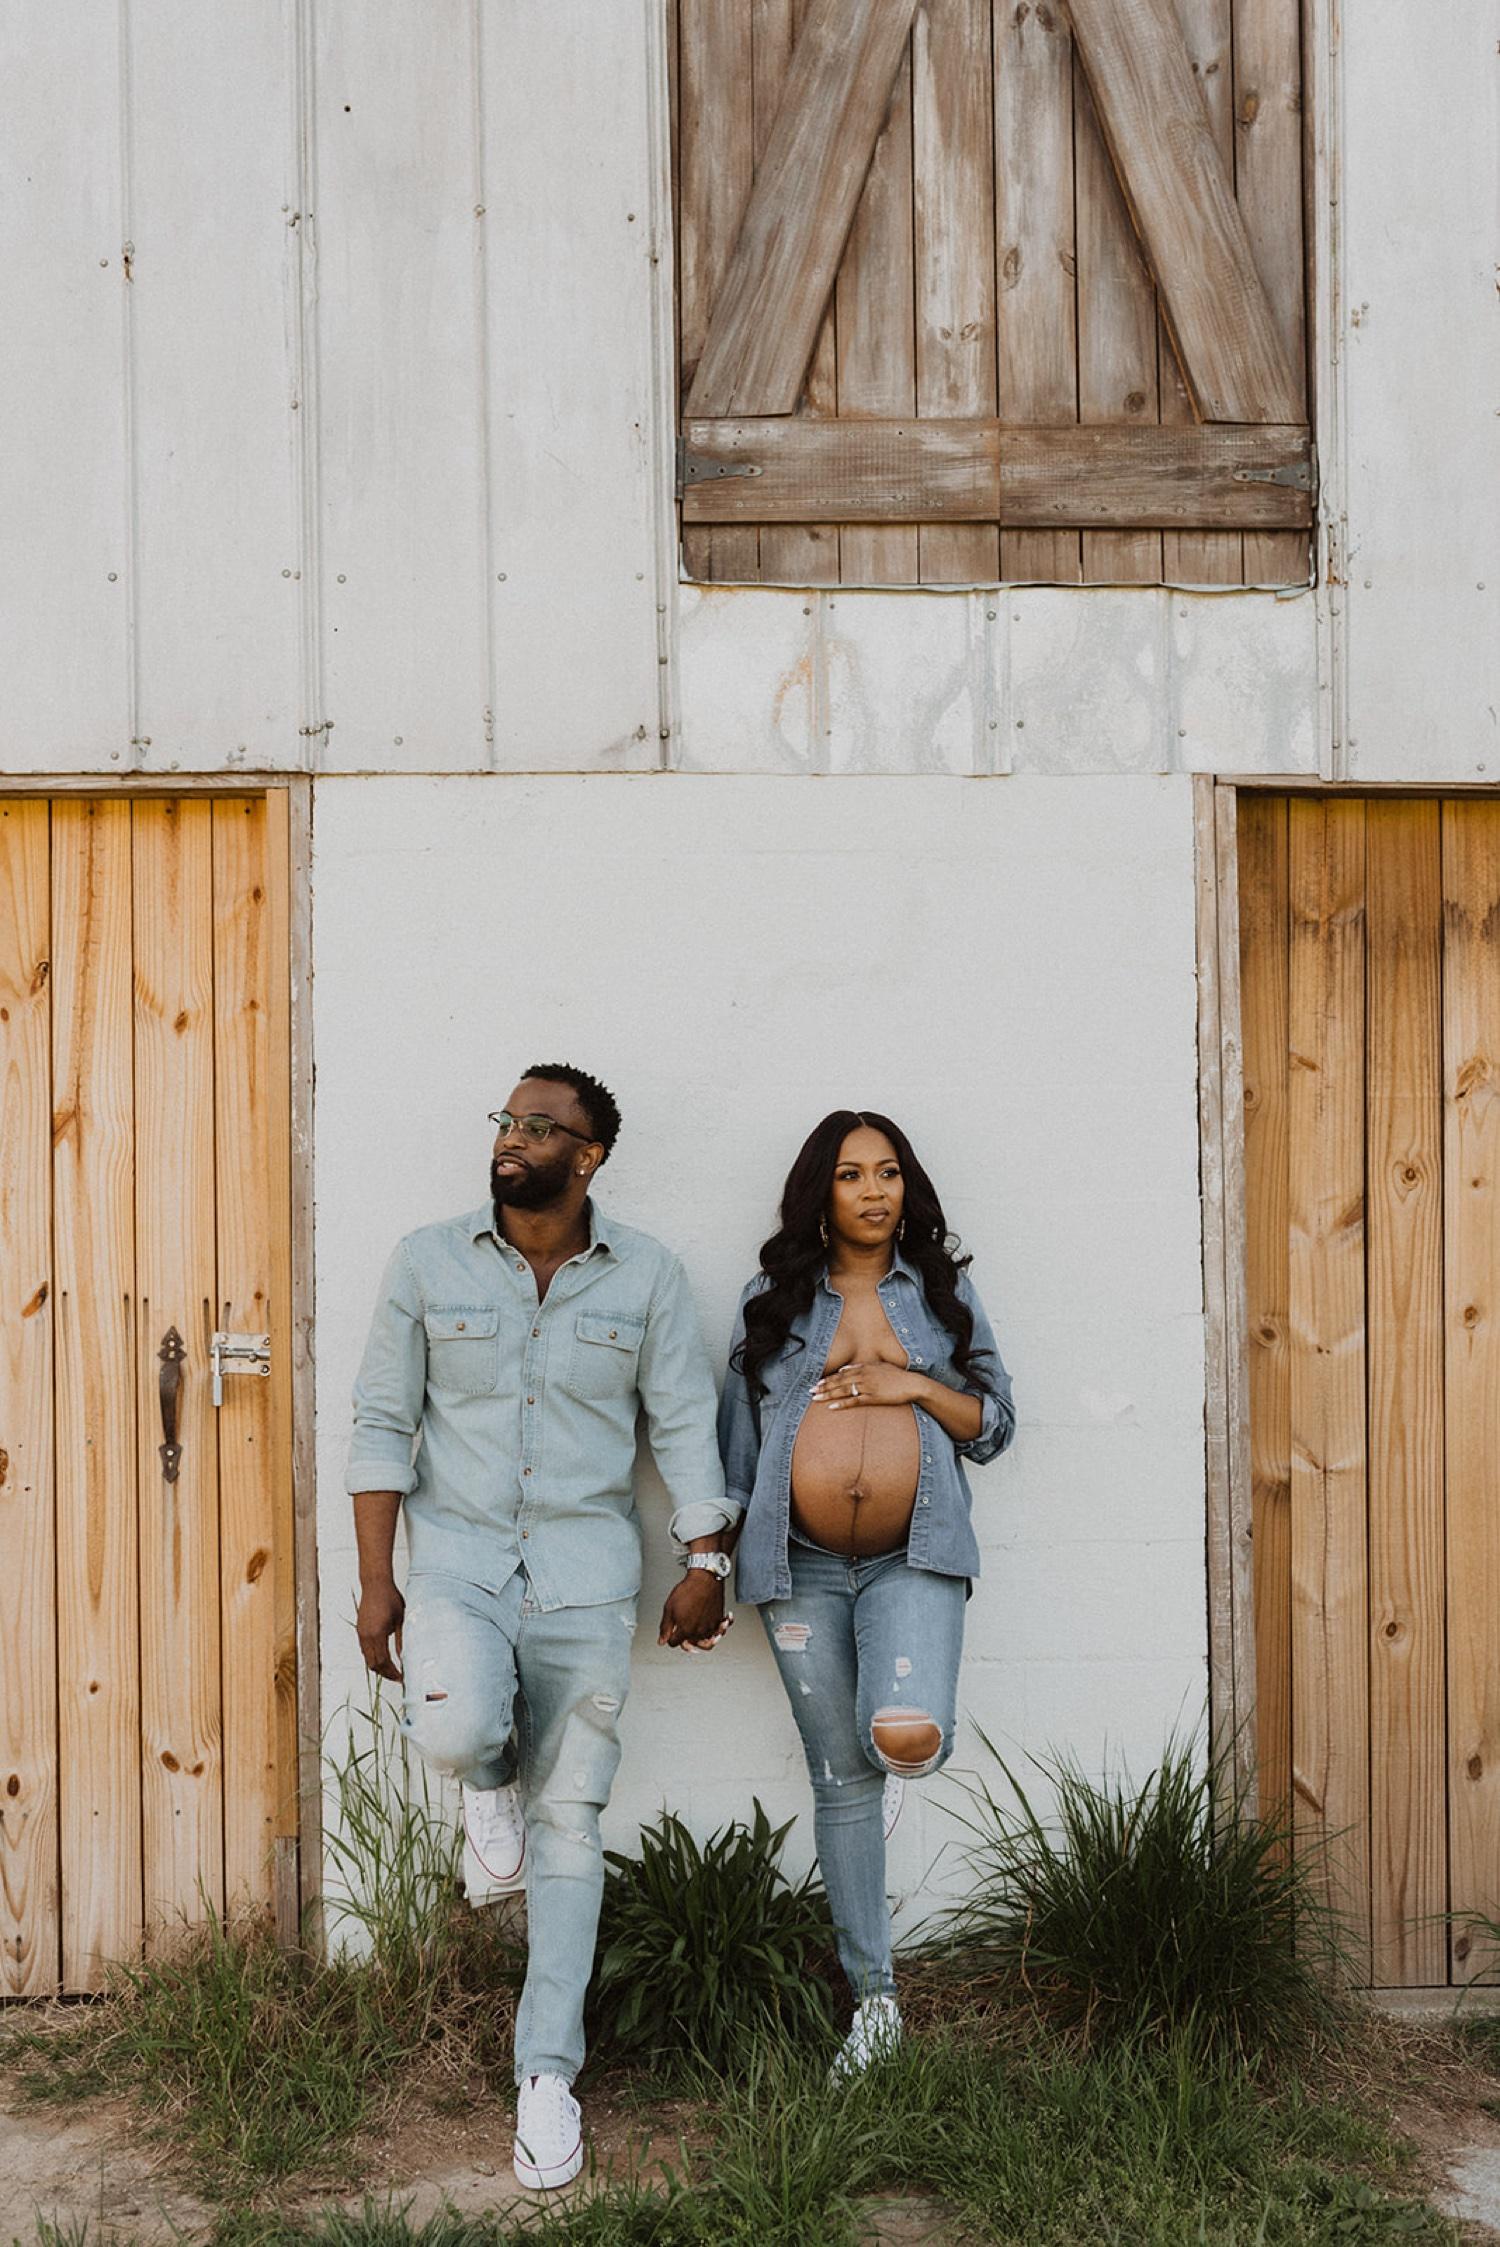 Charlotte Studio Maternity Session with Chic Outfits for Couple